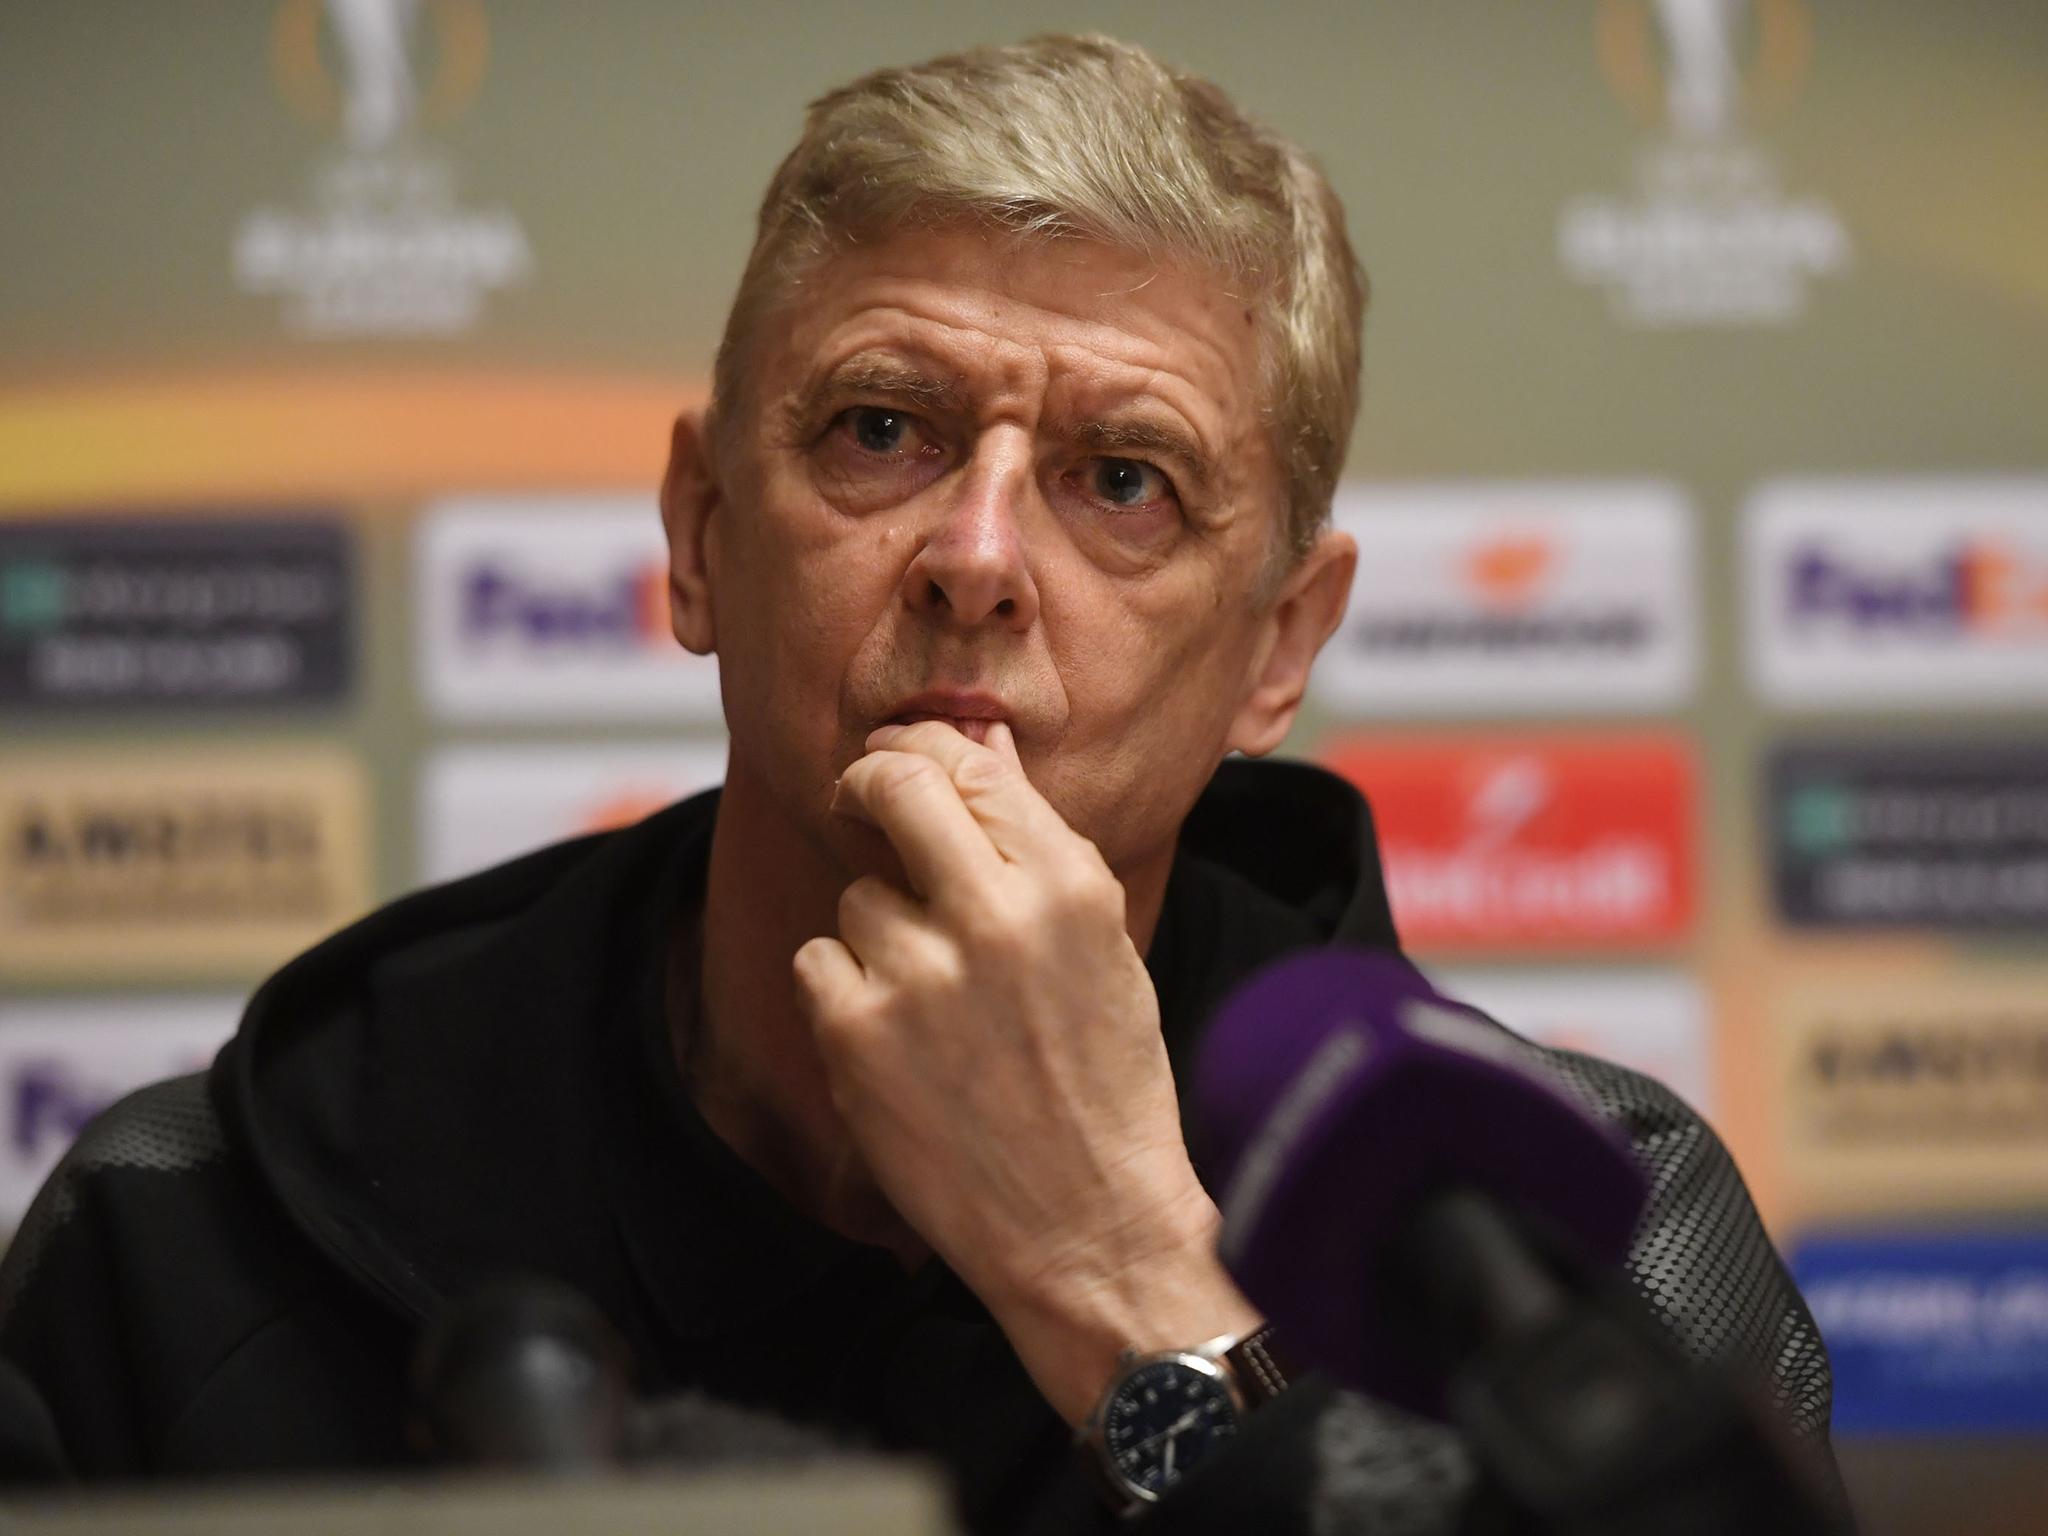 Arsene Wenger believes the workload of Arsenal's season has started affecting his players